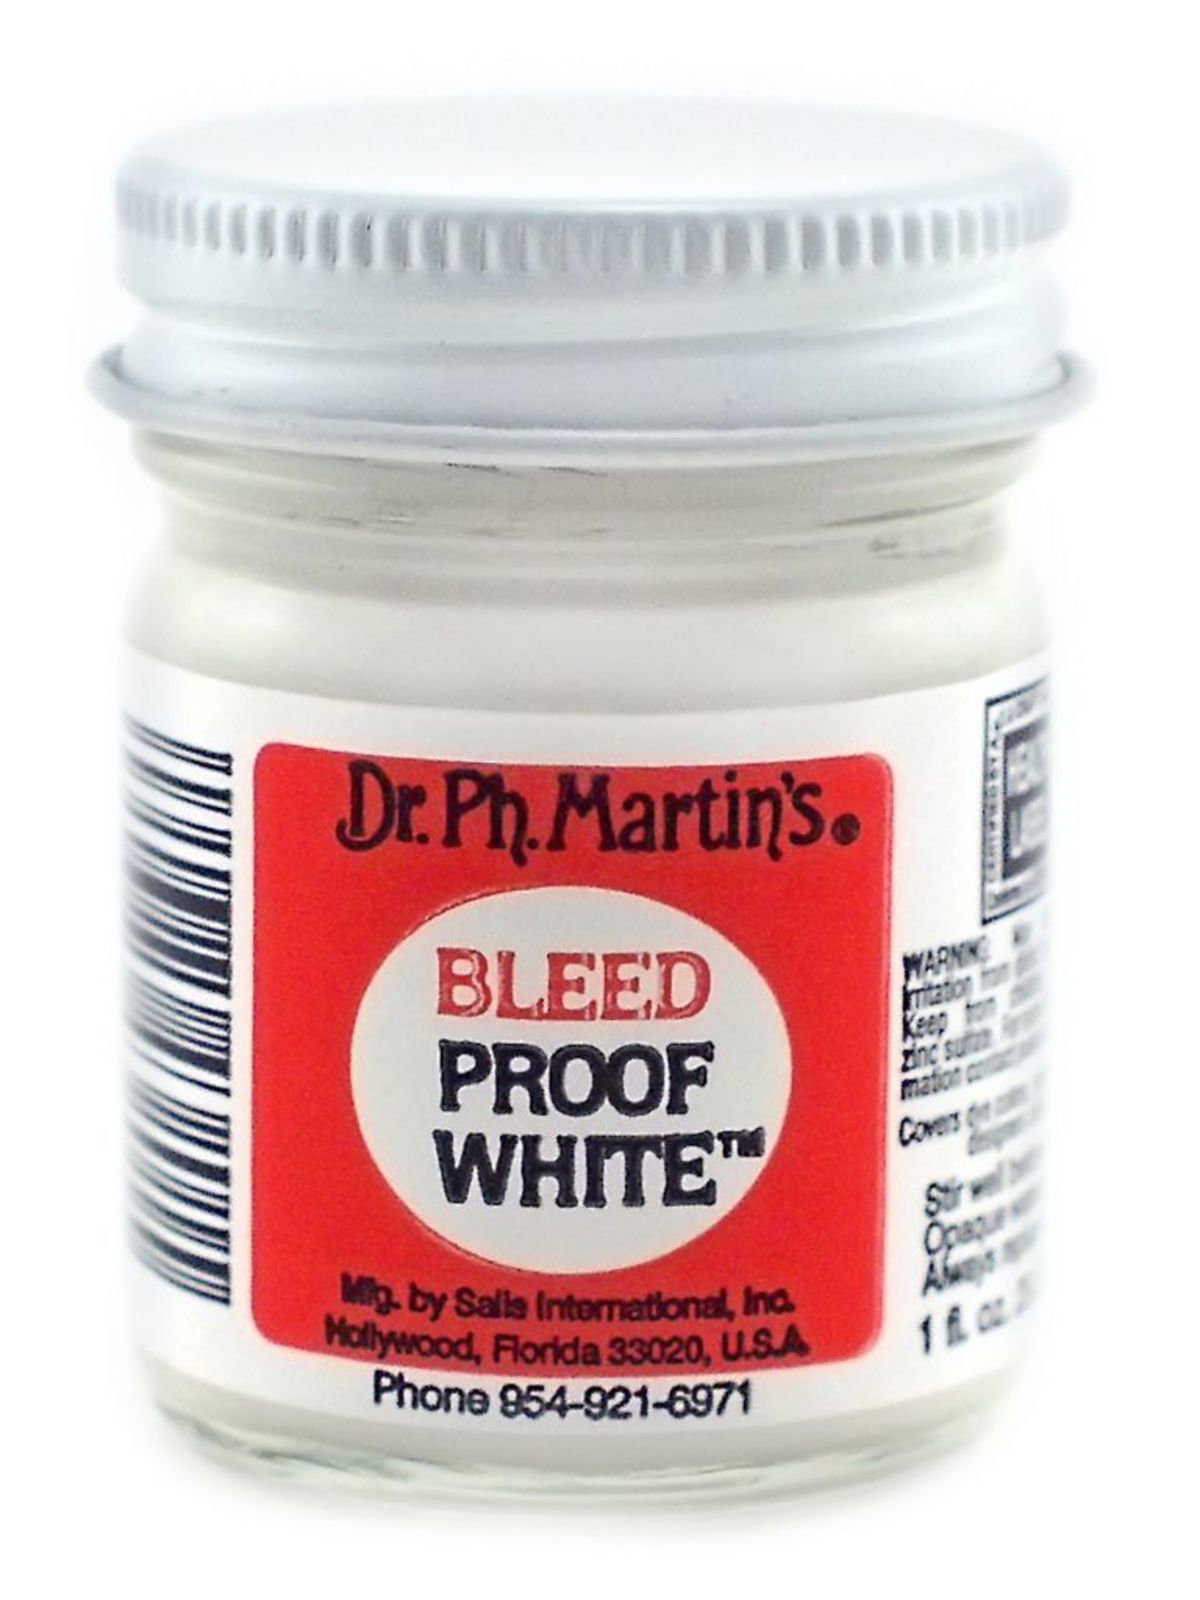 Love them all . . . Materials: Dr Ph Martins bleedproof white and